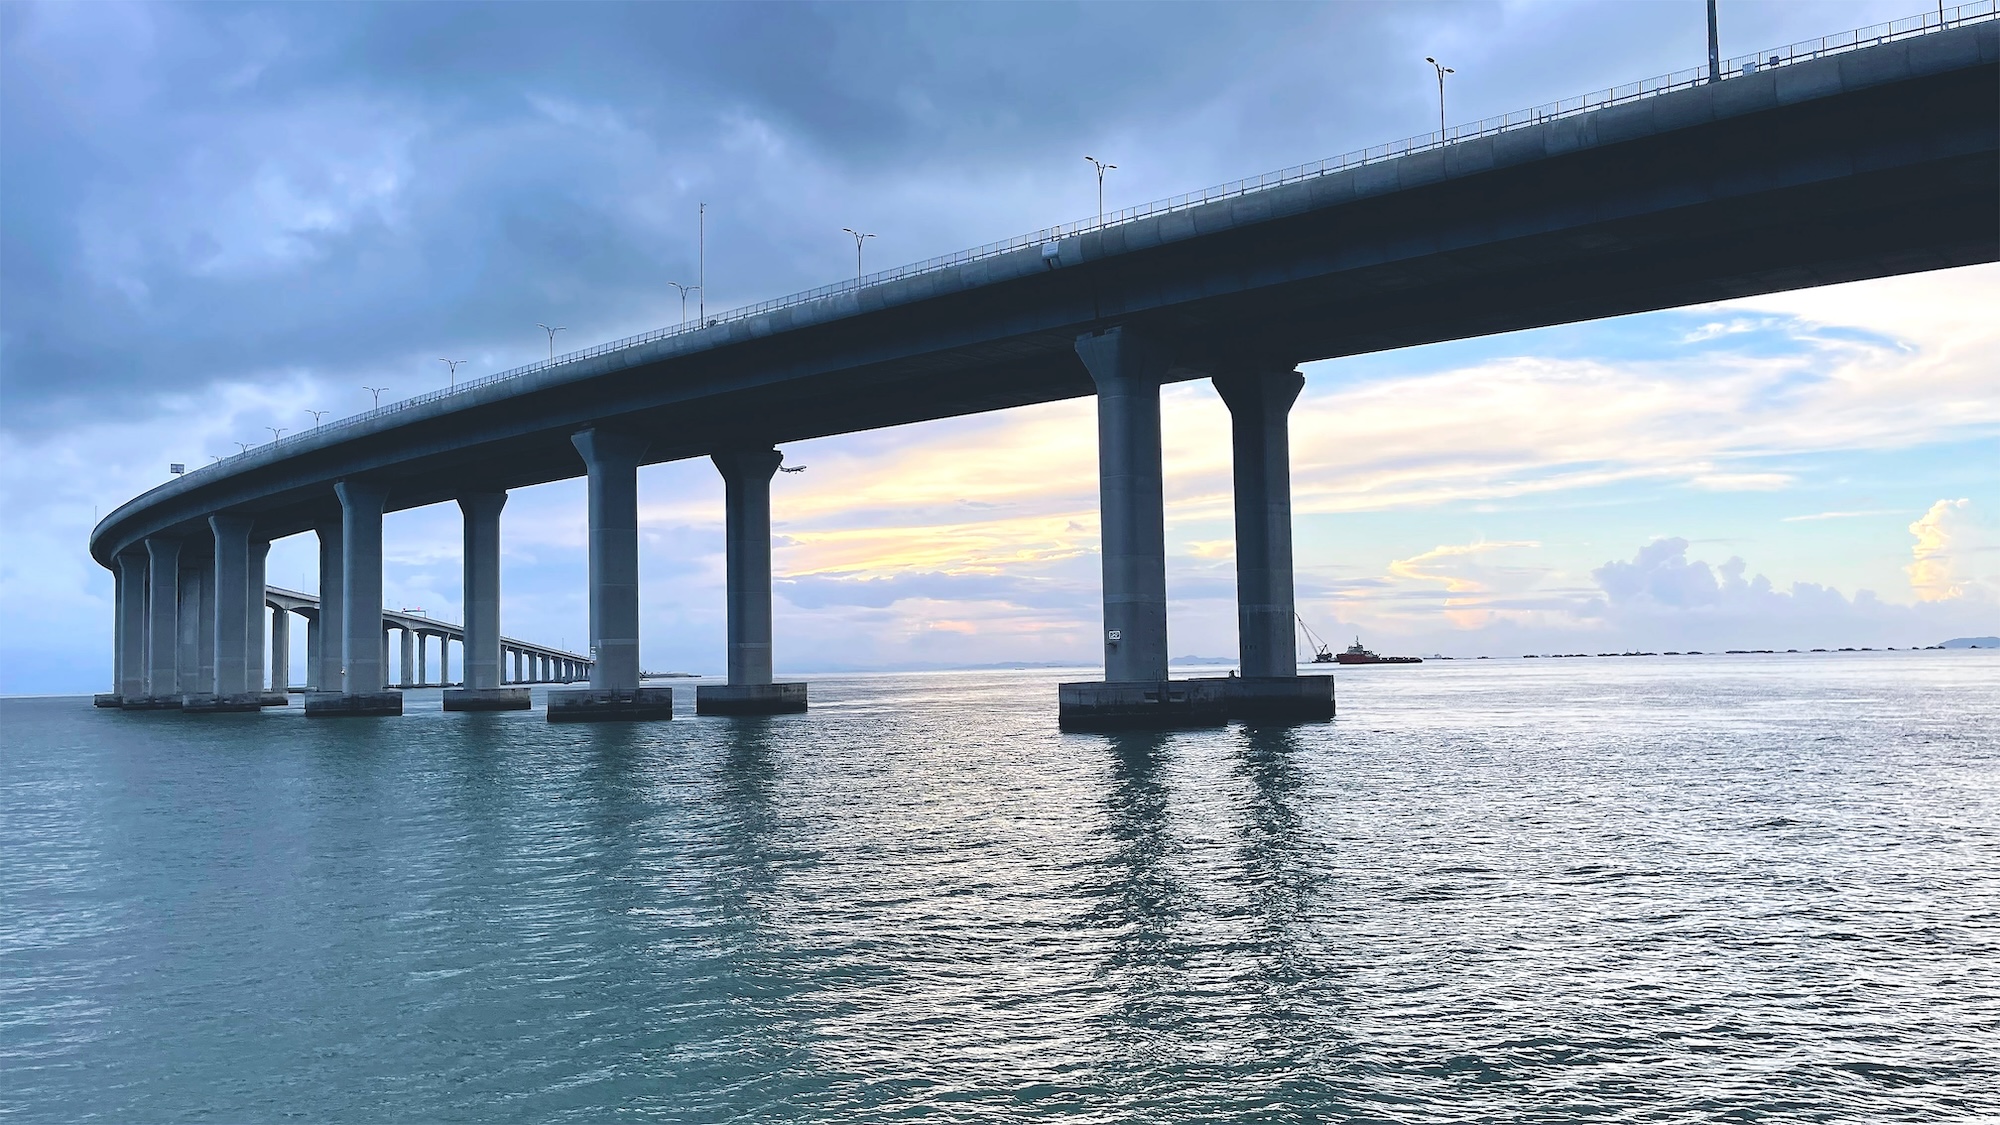 Hong Kong-Zhuhai-Macao Bridge tours have been sold out until January